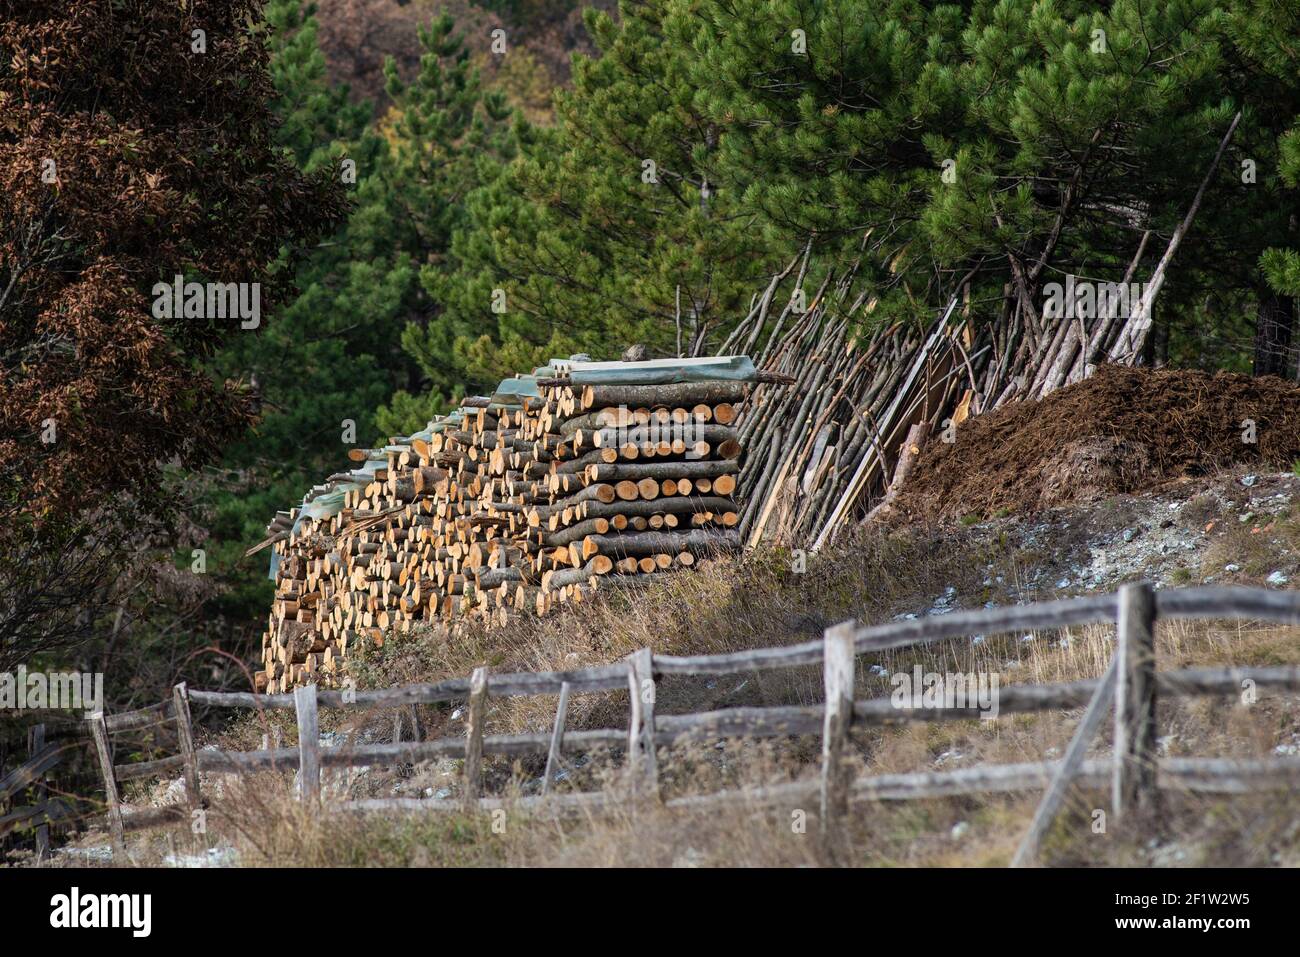 Firewood logs prepared for cold winter days Stock Photo